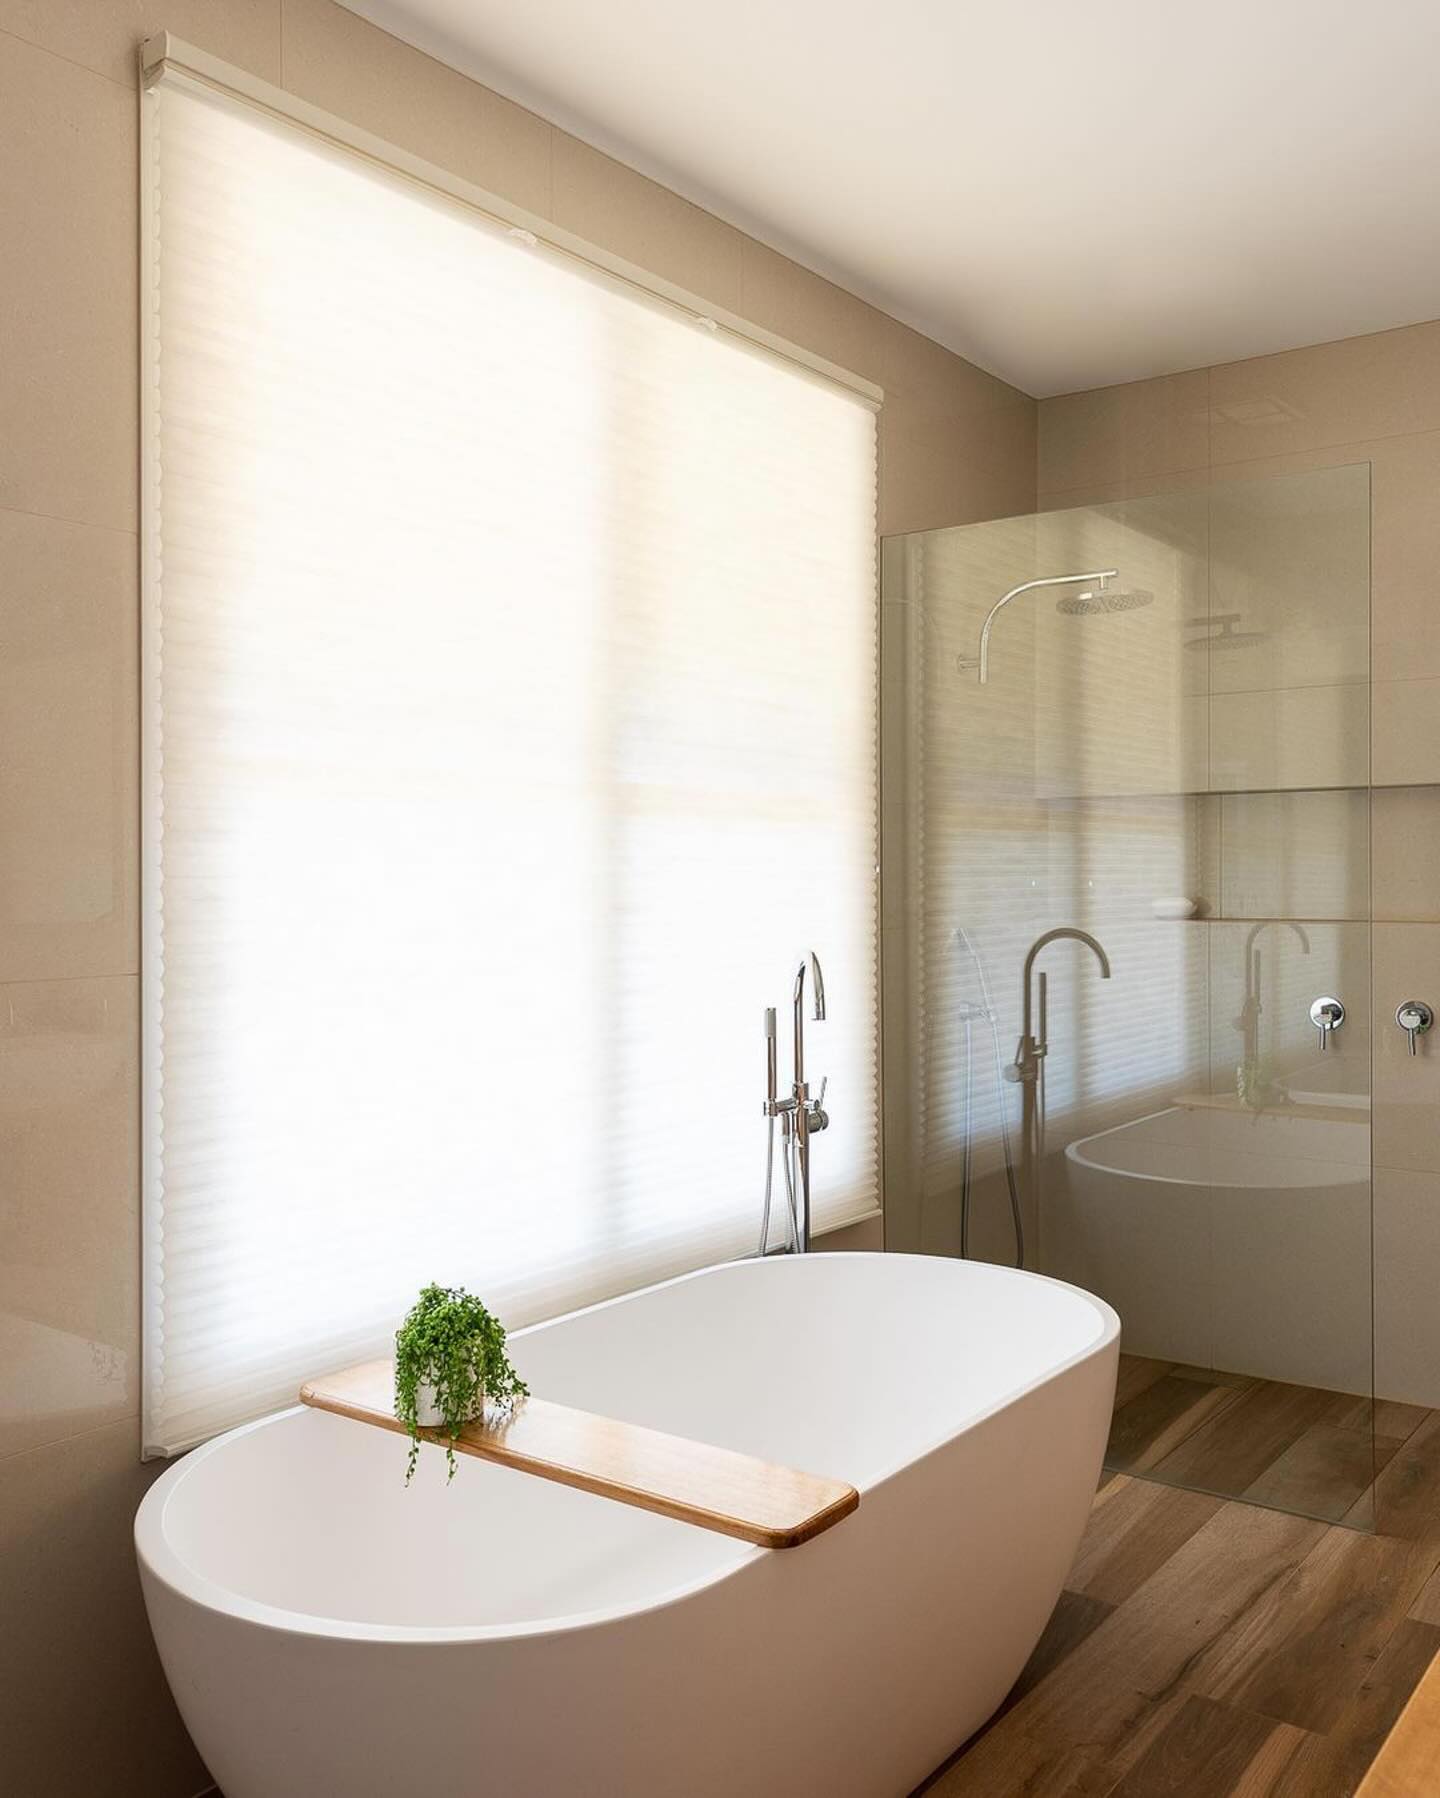 Elegant bathroom with cordless top-down honeycomb shade partially open over a freestanding bathtub, enhancing privacy and natural light